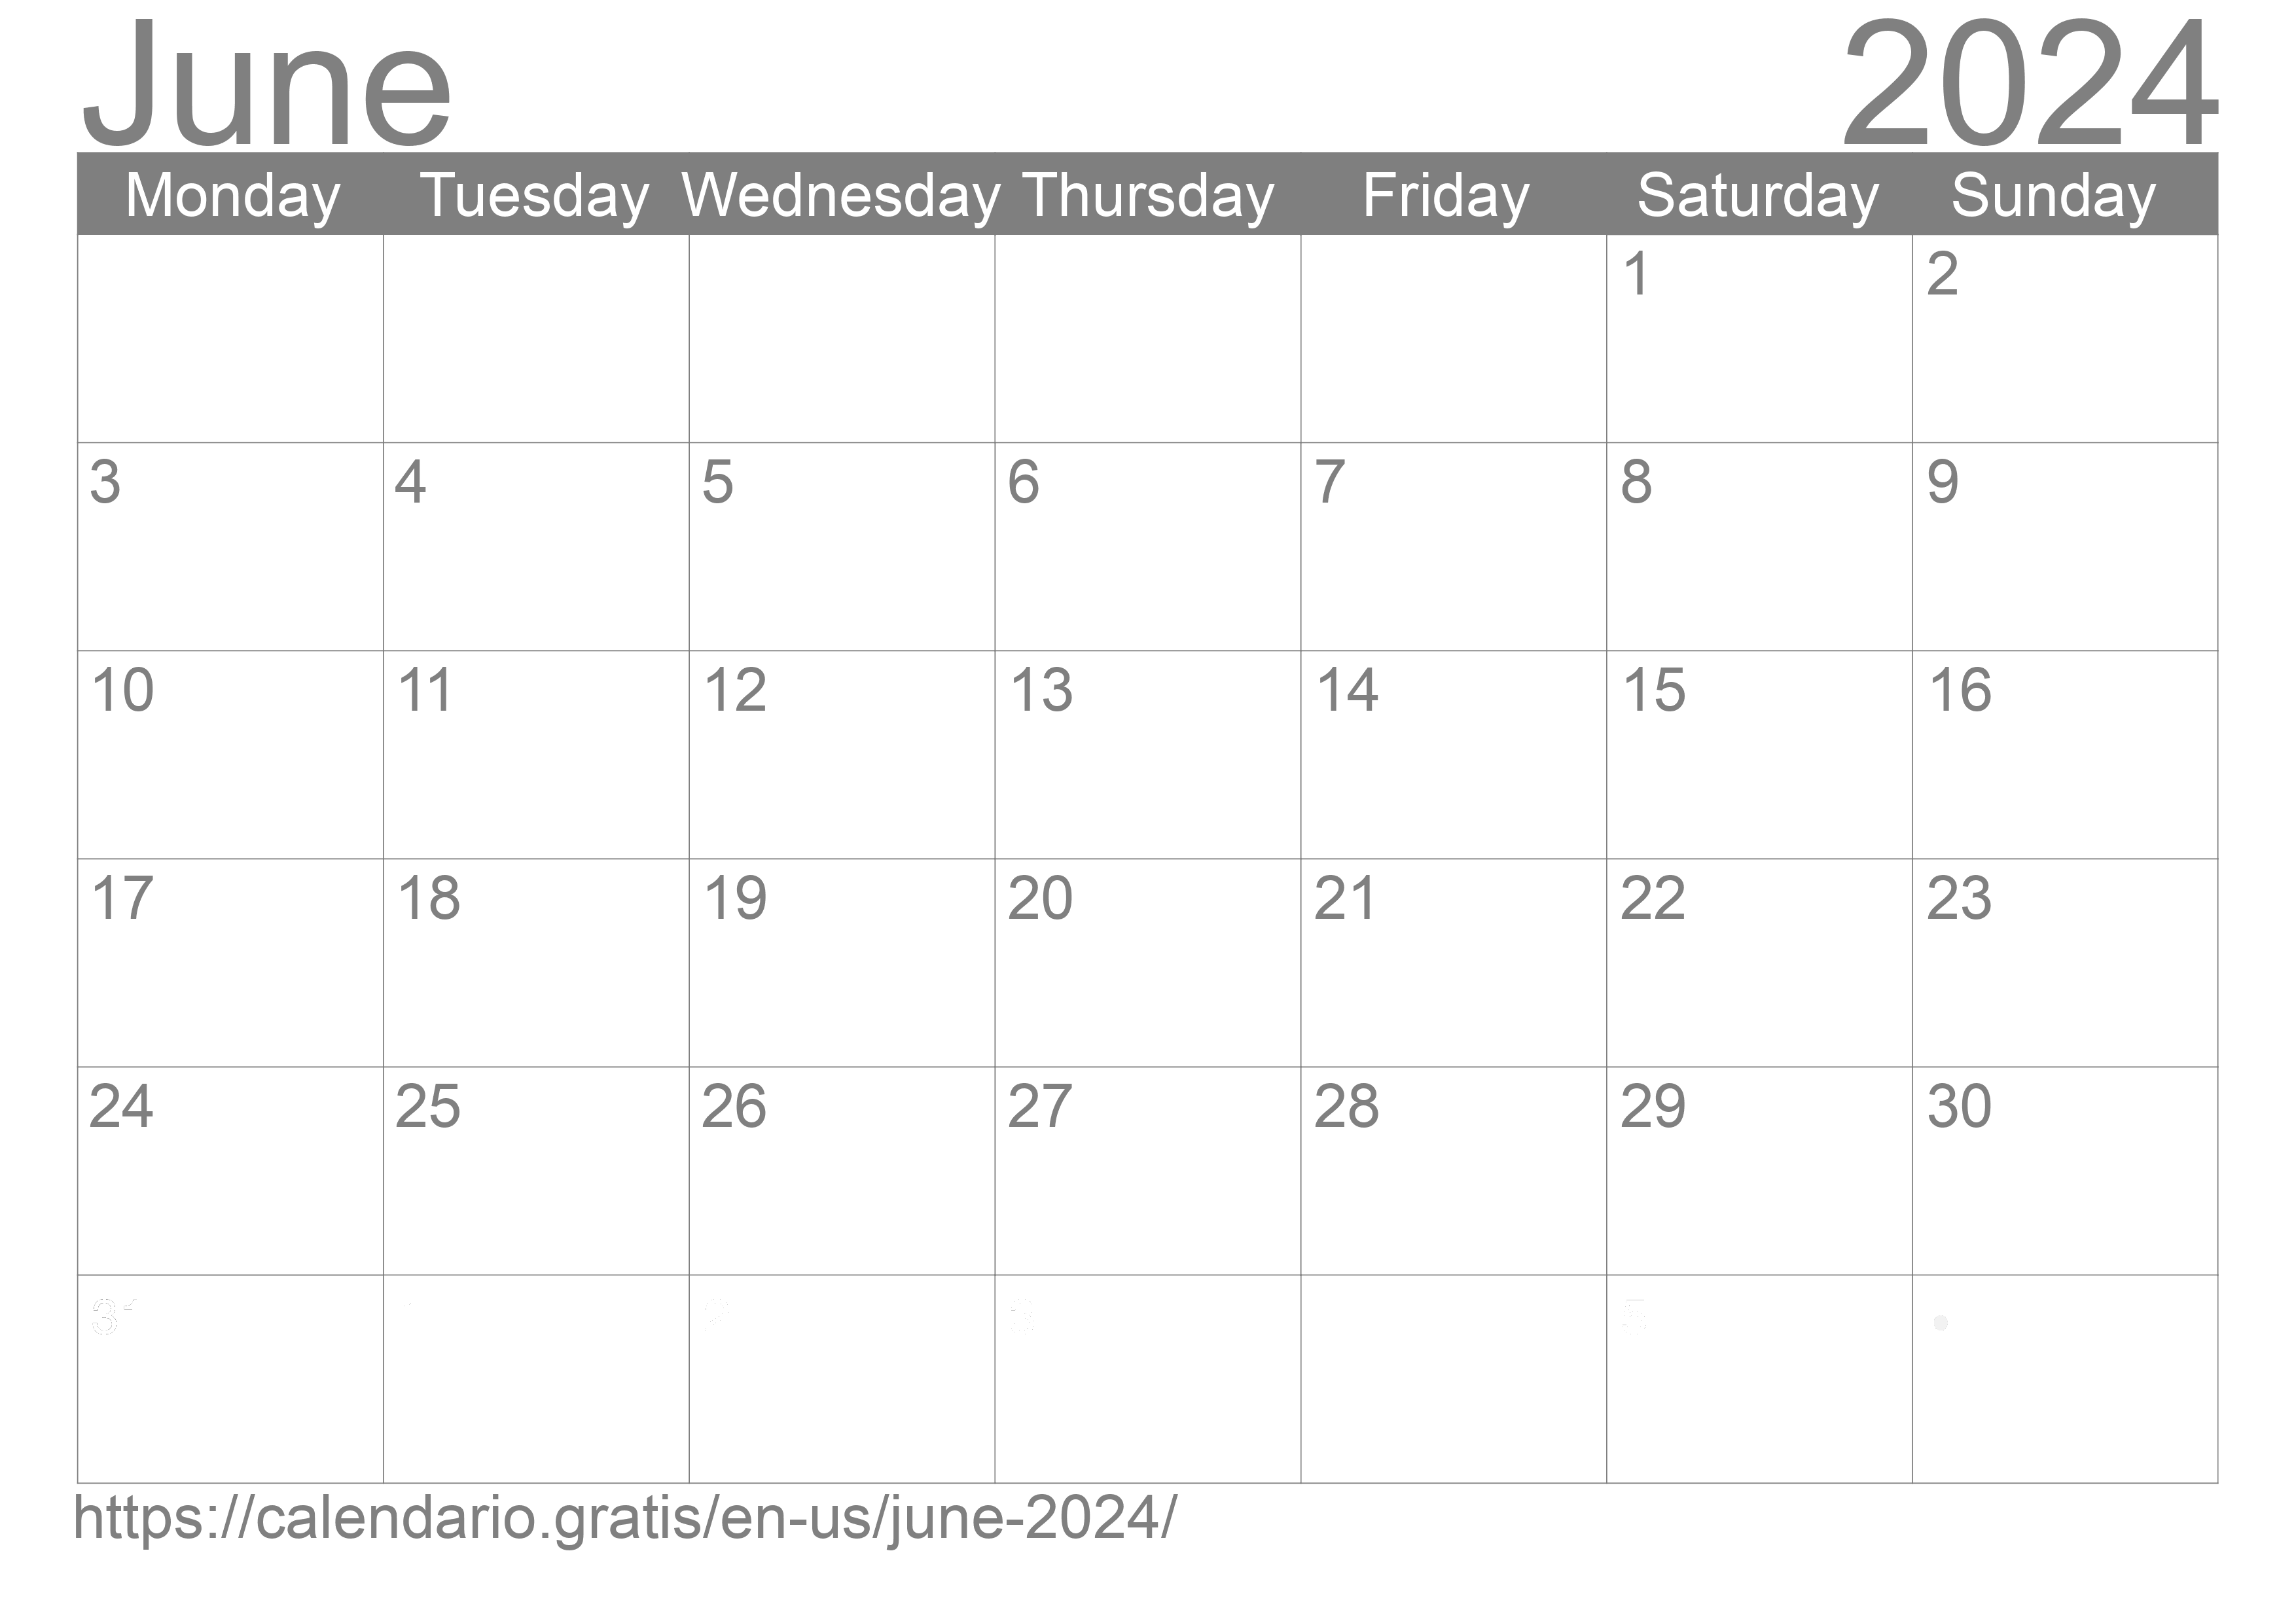 Calendar June 2024 from United States of America in English ☑️